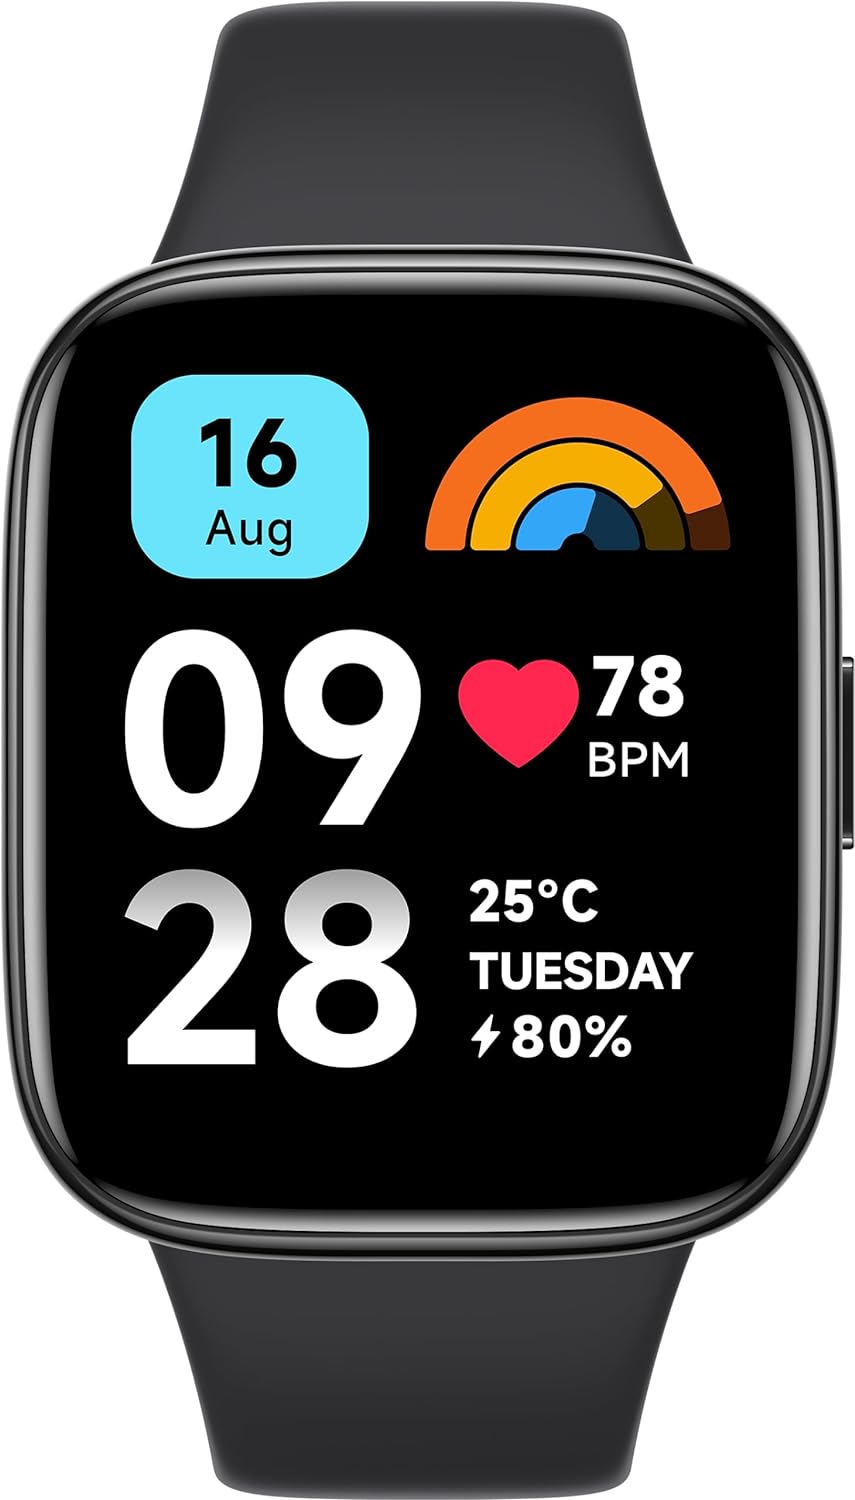 Xiaomi Redmi Smart Watch 3 Active Black| 1.83 Inch Big LCD Display, 5ATM Water Resistant, 12 Days Battery Life, GPS, 100+ Workout Mode, Heart Rate Monitor, Full Scale Fitness Tracking.